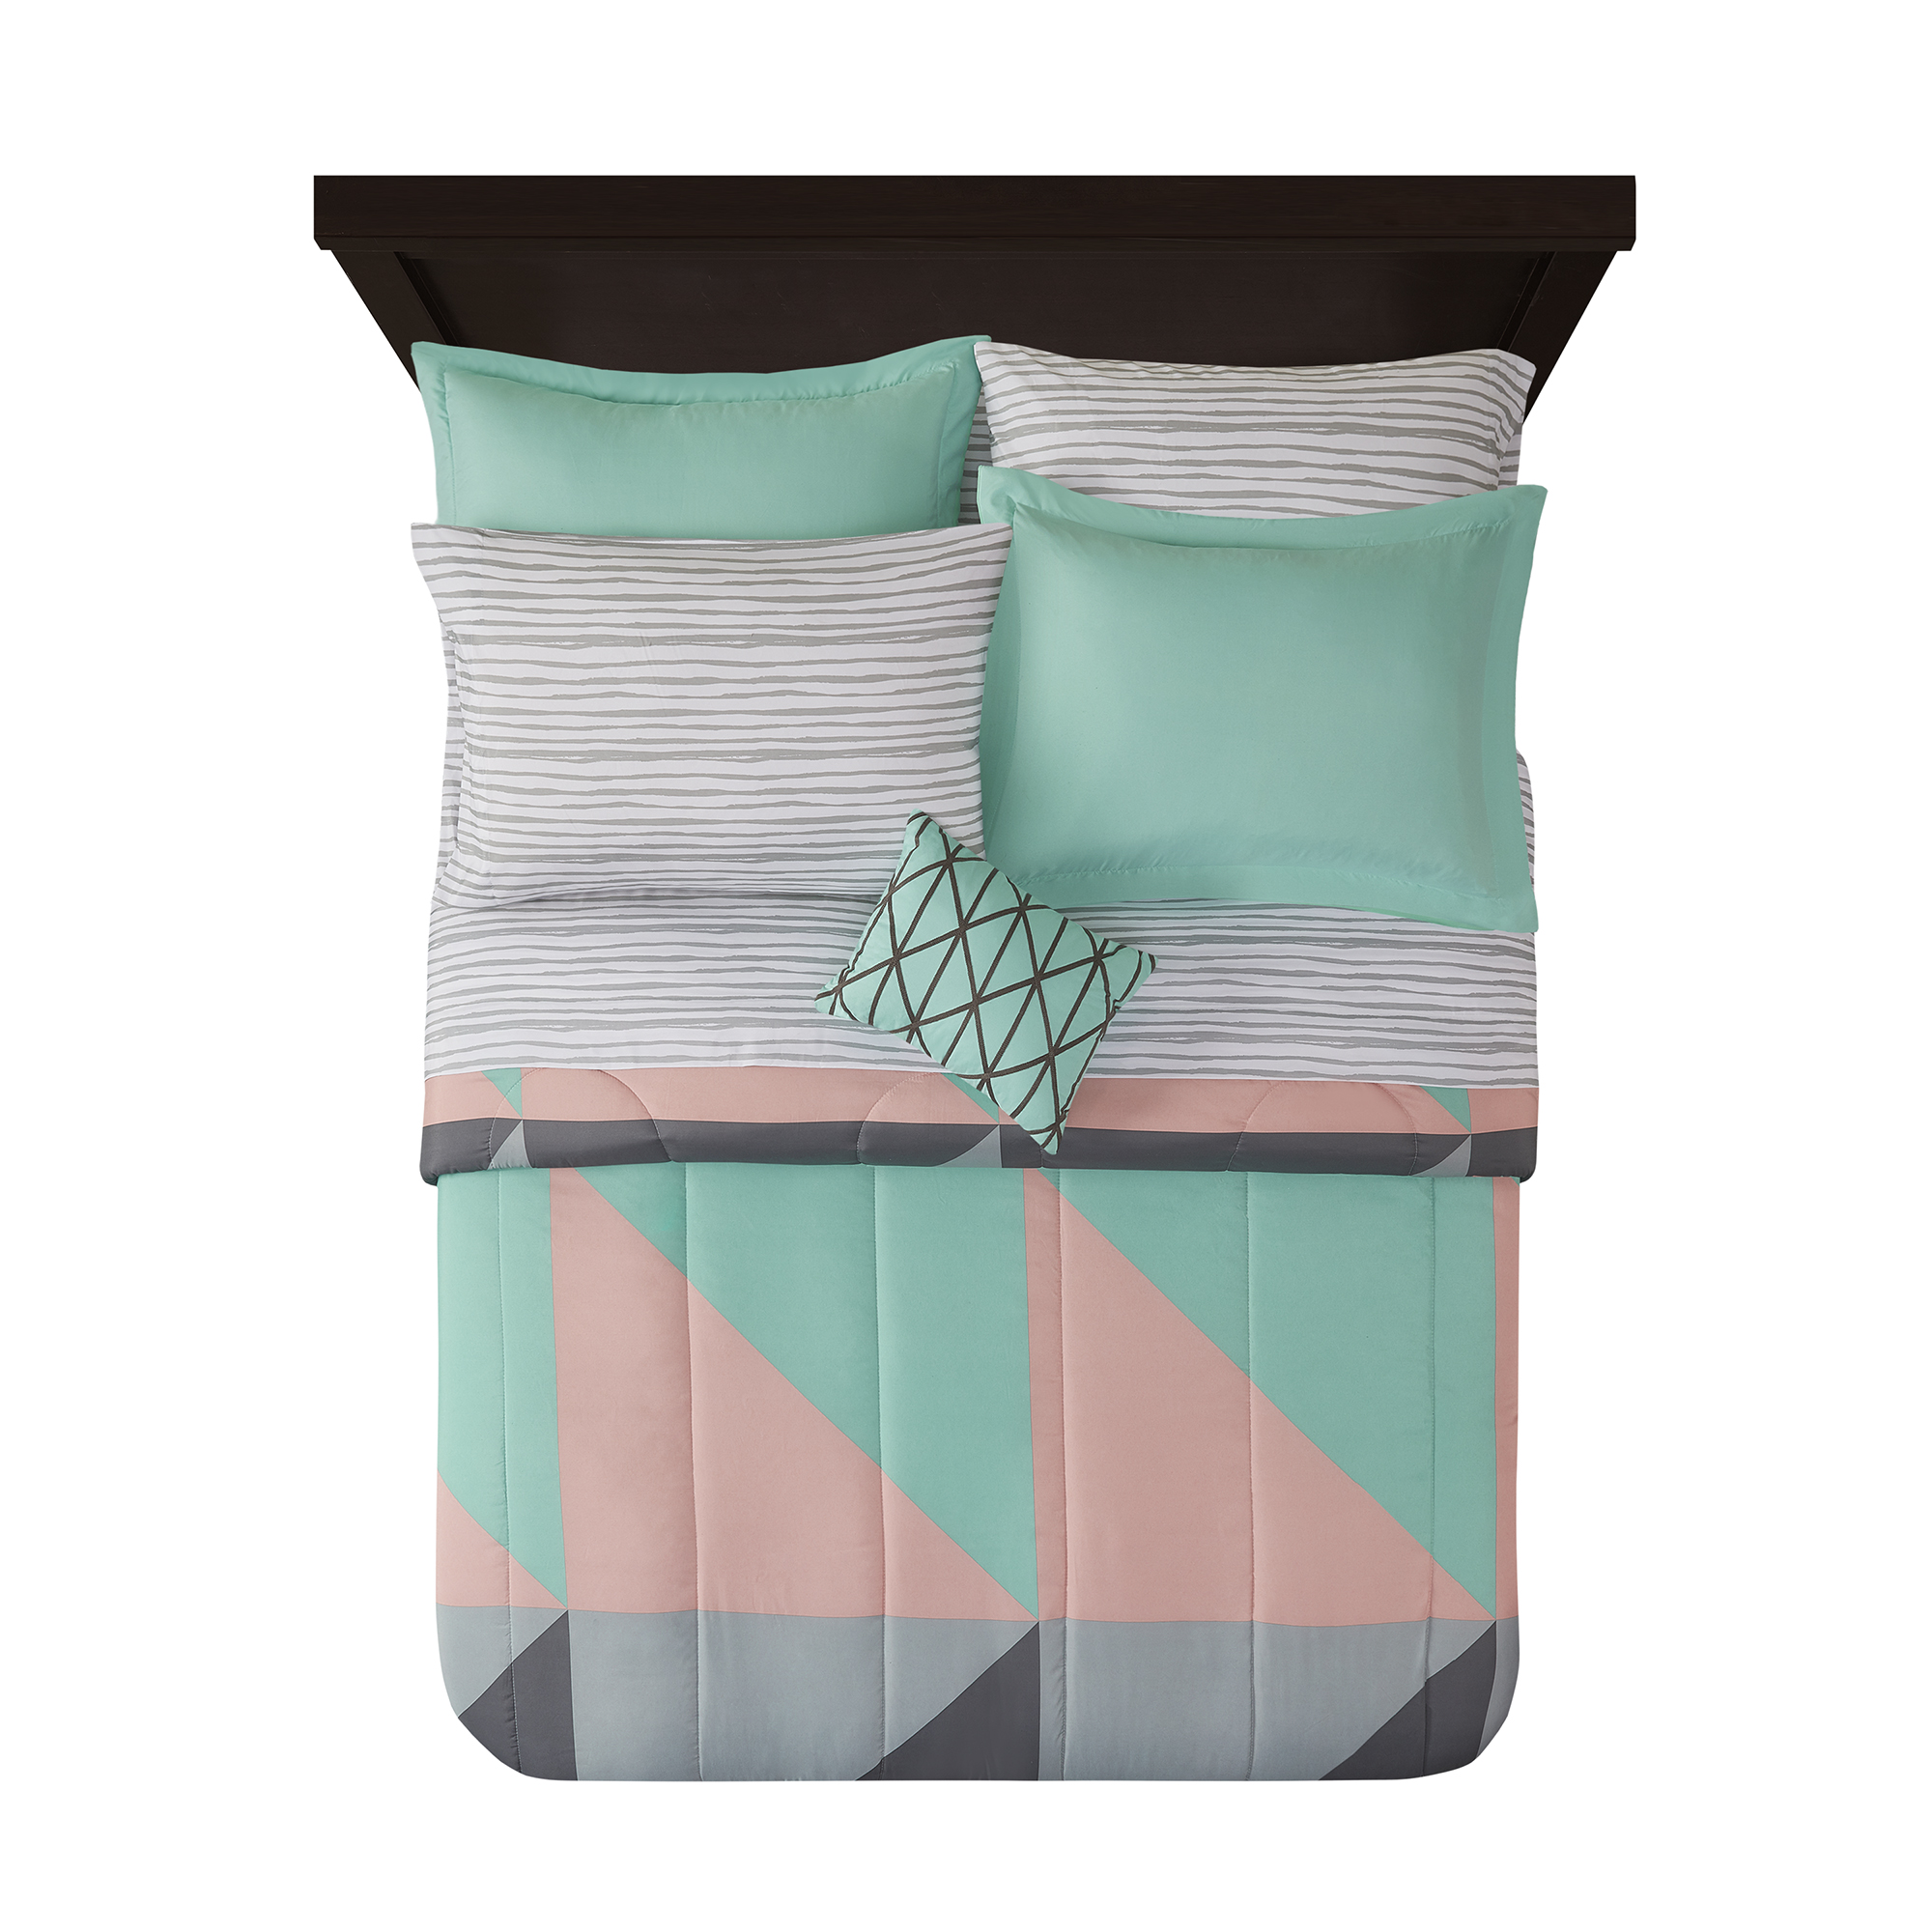 Mainstays Gray and Teal Geometric 8 Piece Bed in a Bag Comforter Set With Sheets, King - image 2 of 8